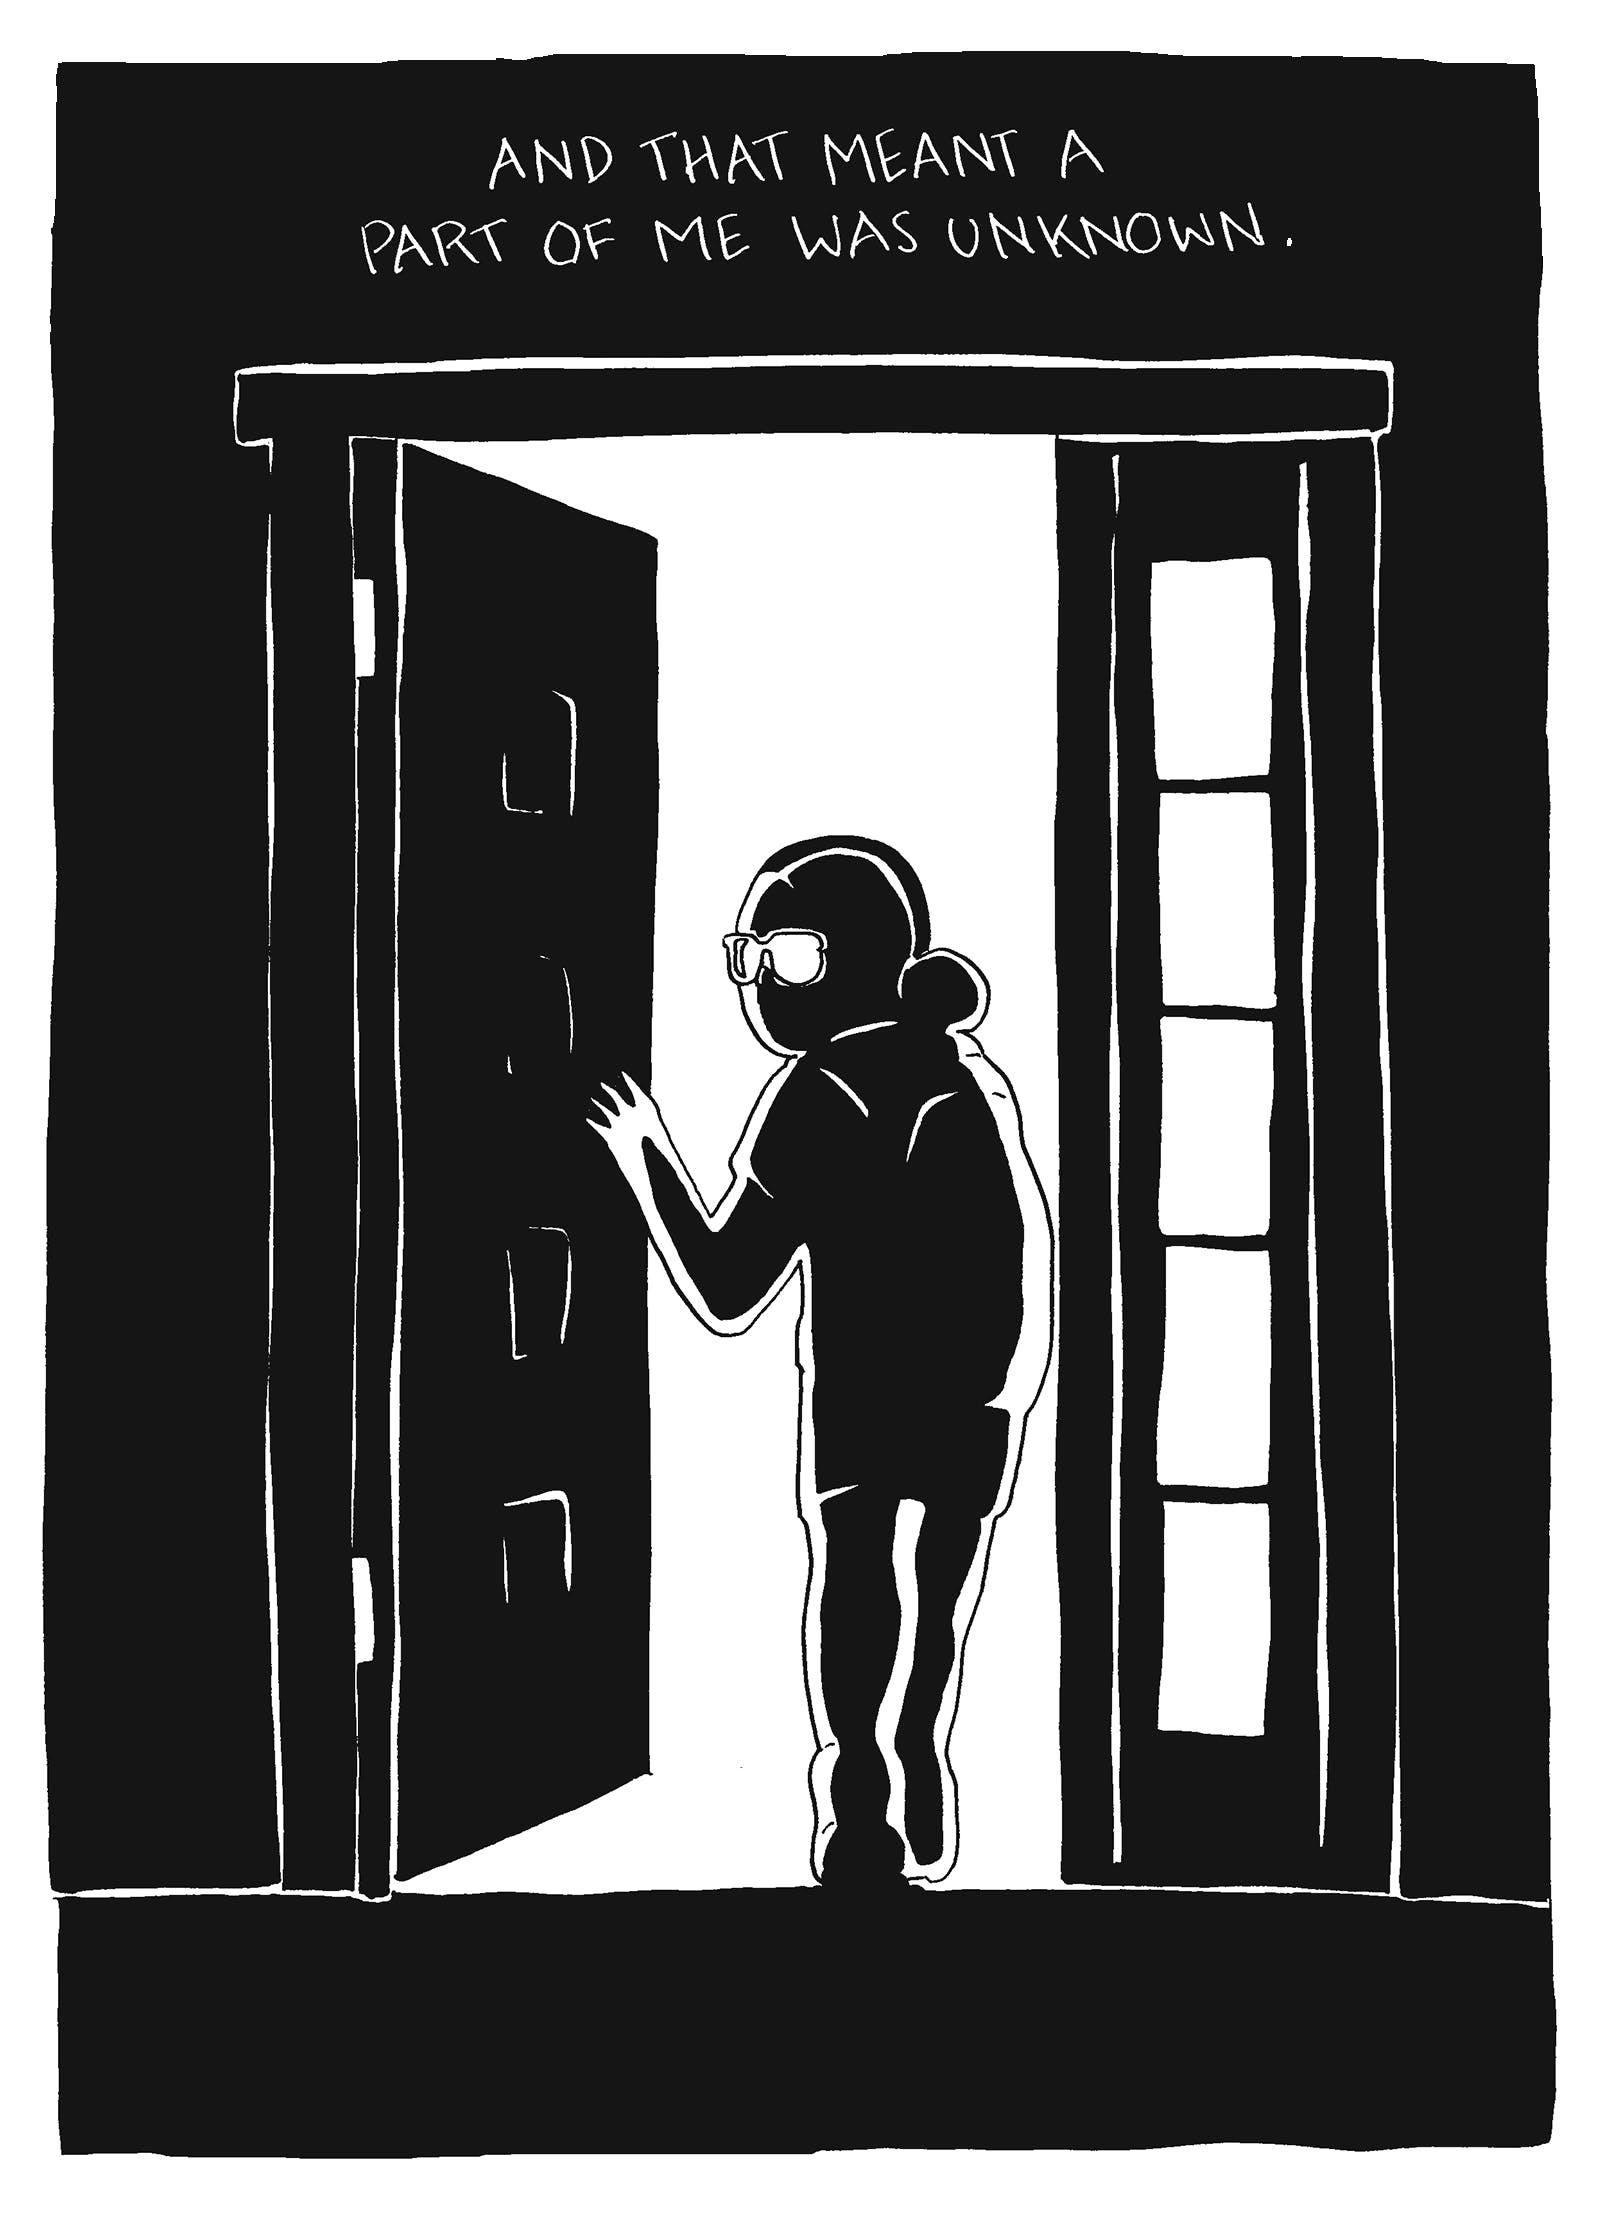 A panel from Meg O’Shea’s A Part of Me is Still Unknown. The narrator, in silhouette, stands backlit in a doorway surrounded by darkness